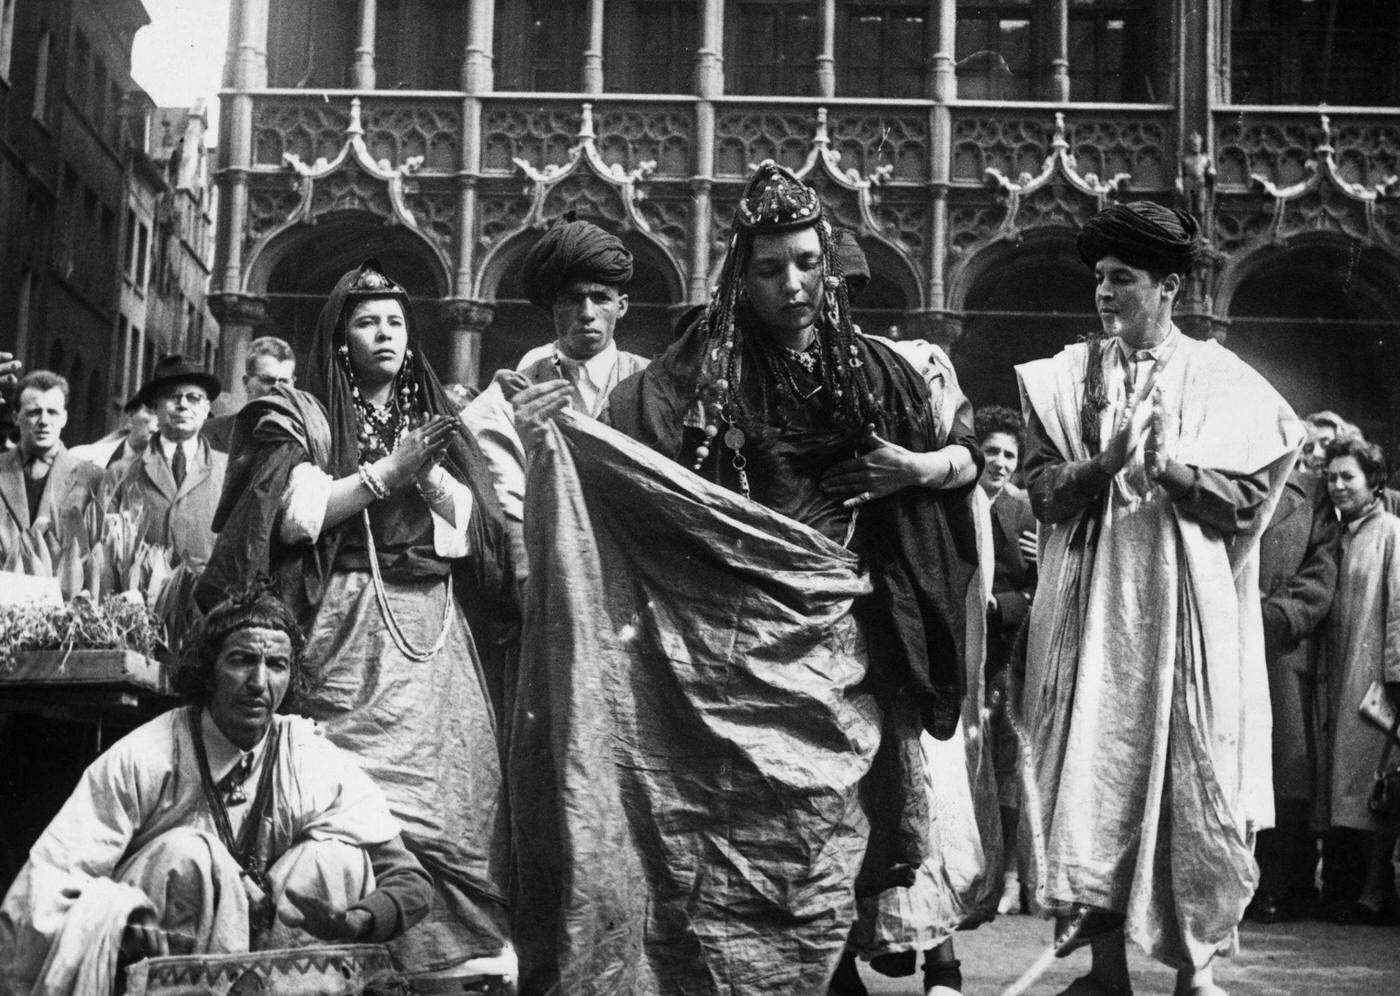 A group of dancers of the Hommes Bleus (Blue People) tribe of Morocco performing a national dance in traditional garb in the Grand Place at Brussels, 1950